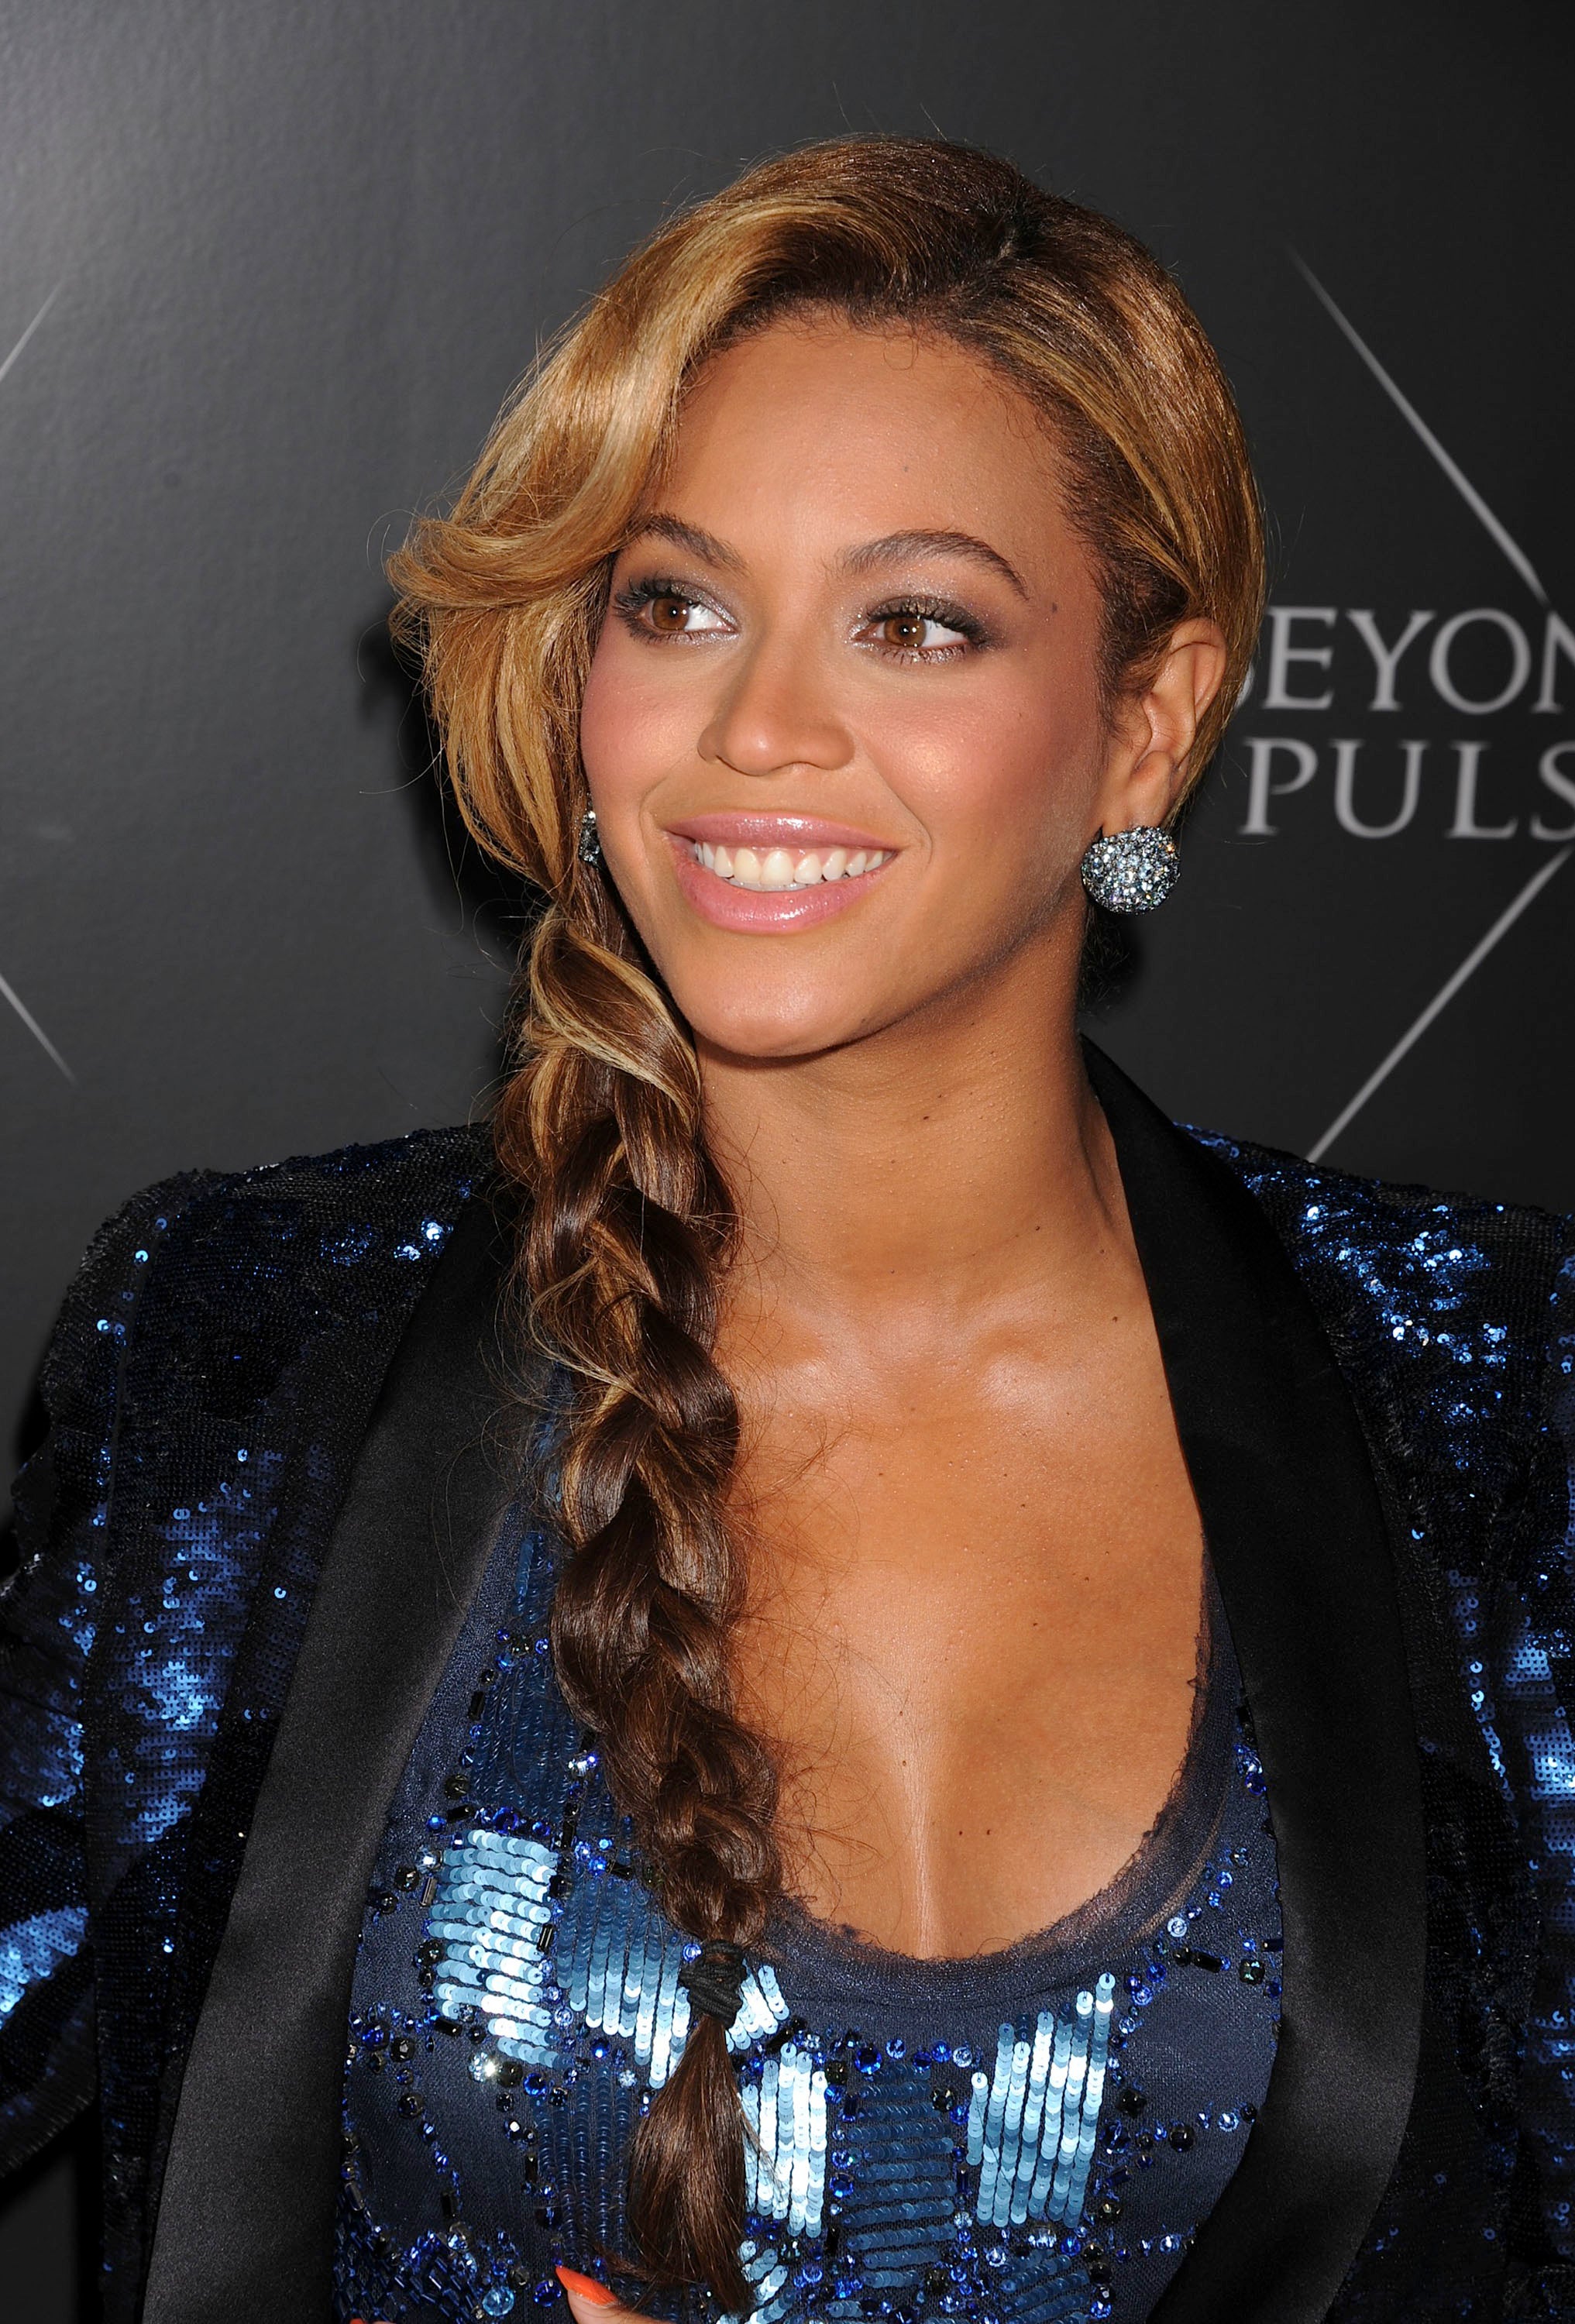 Pregnant Bey 'Hates' Jay-Z's Scent